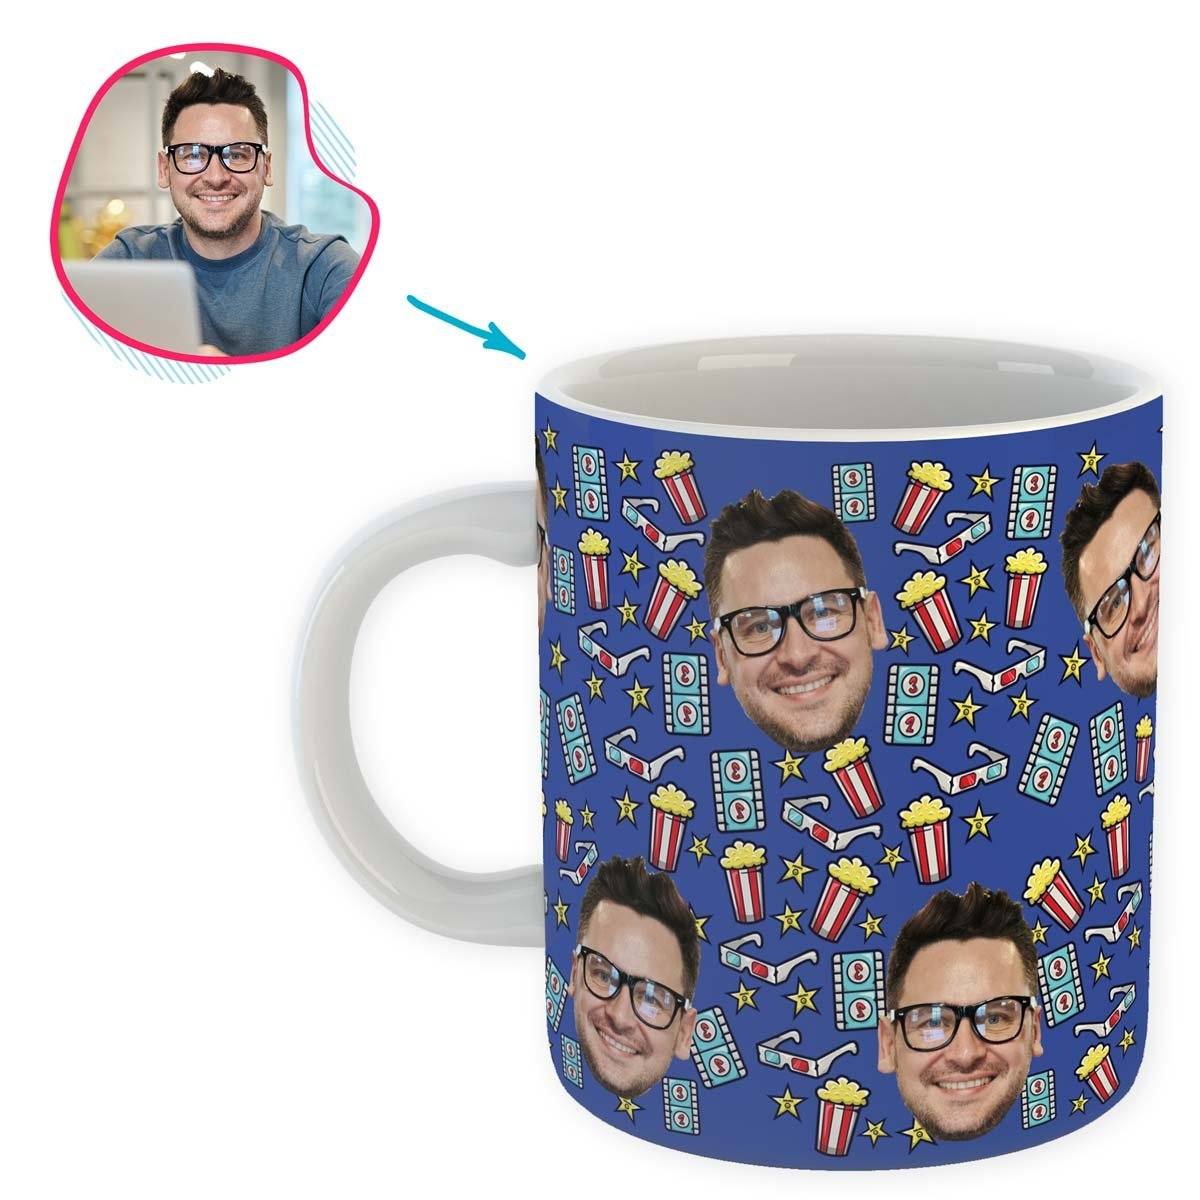 darkblue Movie mug personalized with photo of face printed on it